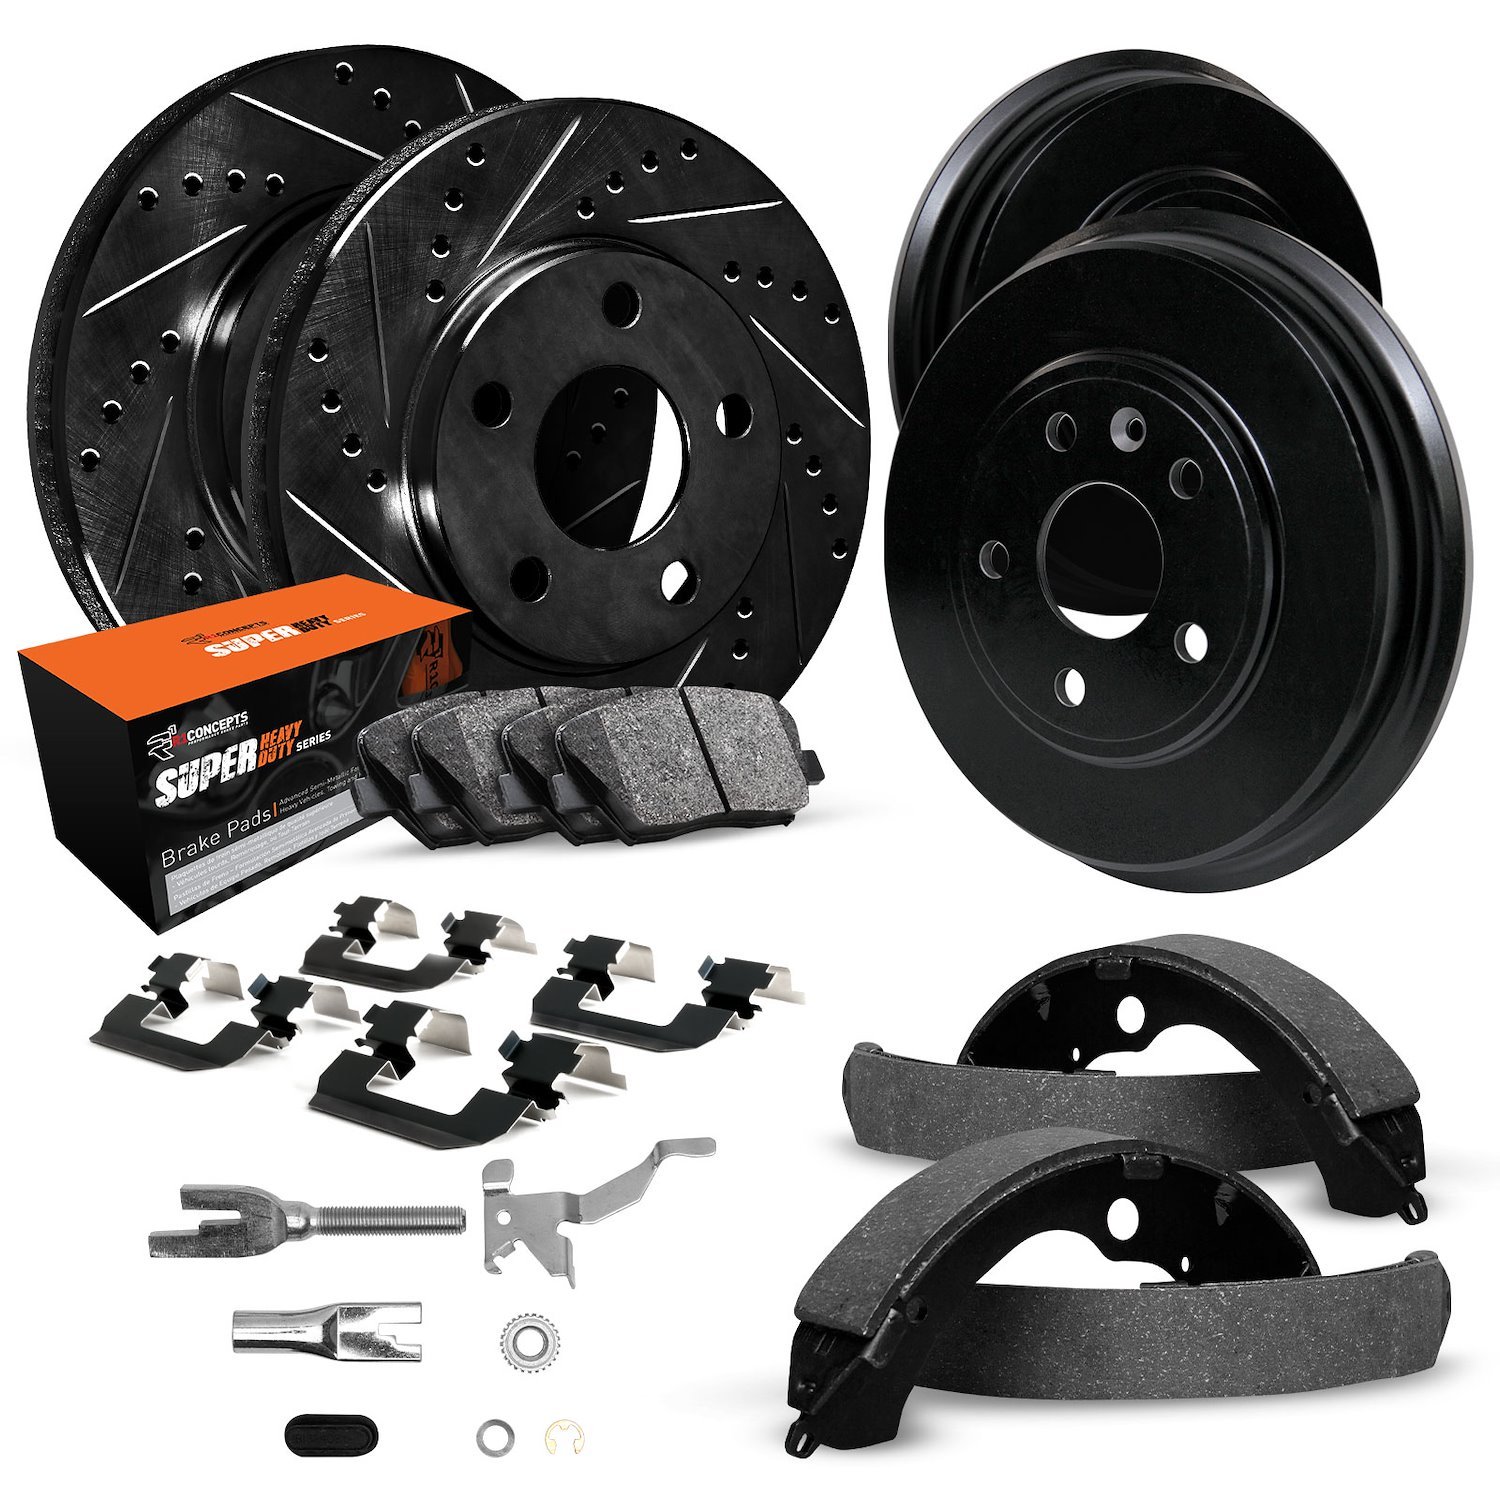 E-Line Slotted Black Brake Rotor & Drum Set w/Super-Duty Pads, Shoes, Hardware/Adjusters, 1983-1994 Ford/Lincoln/Mercury/Mazda